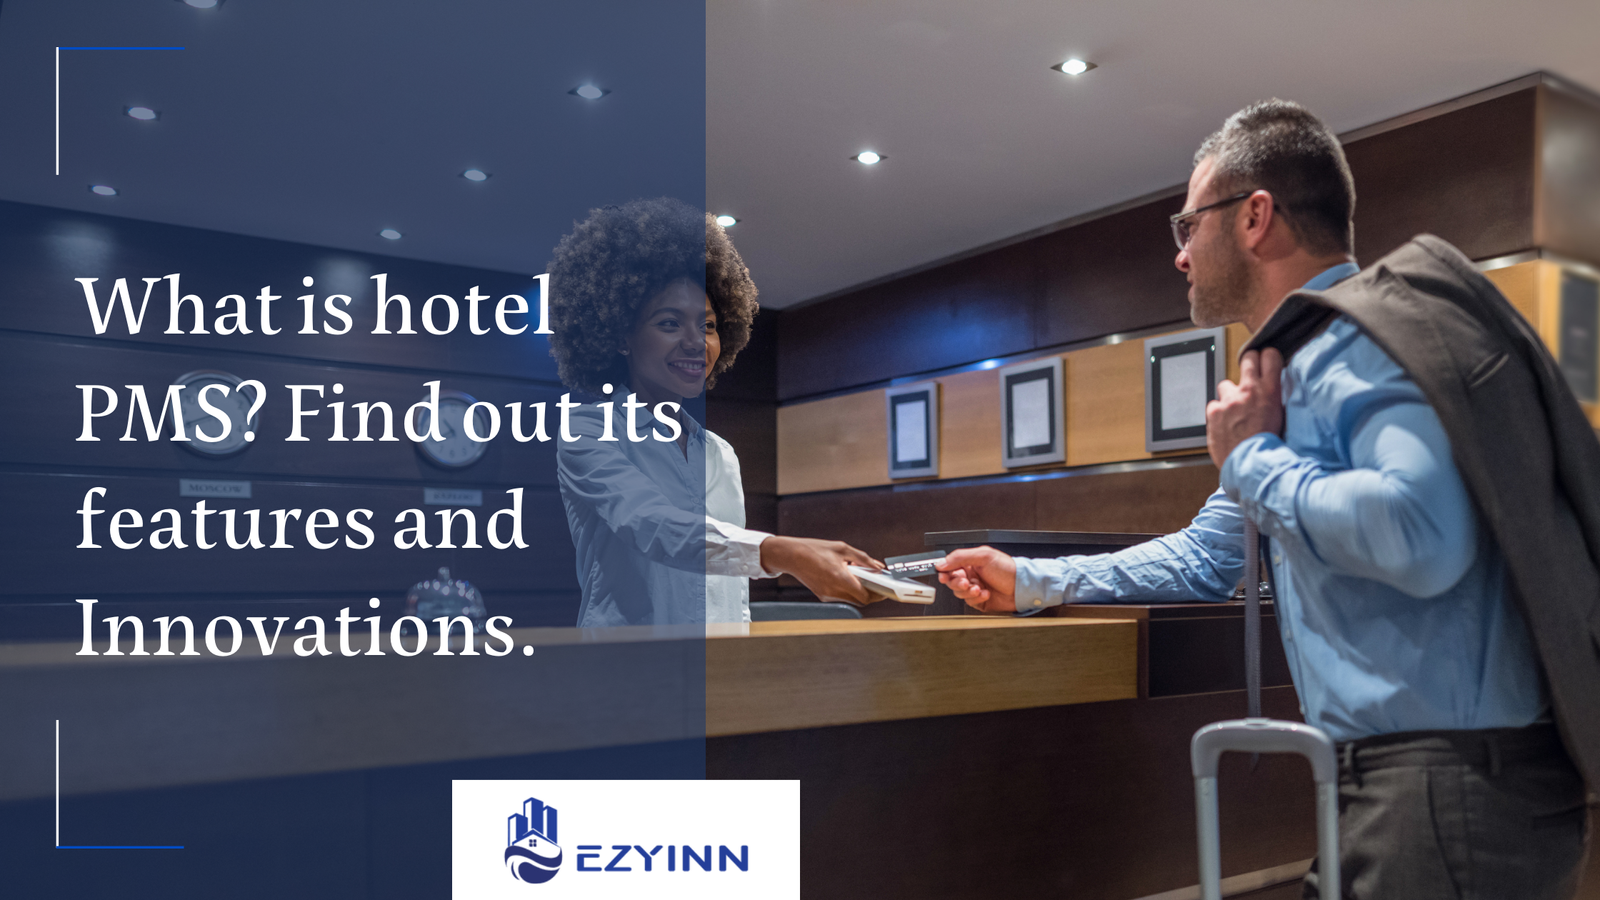 What is hotel PMS Find out its features and Innovations. | Ezyinn PMS